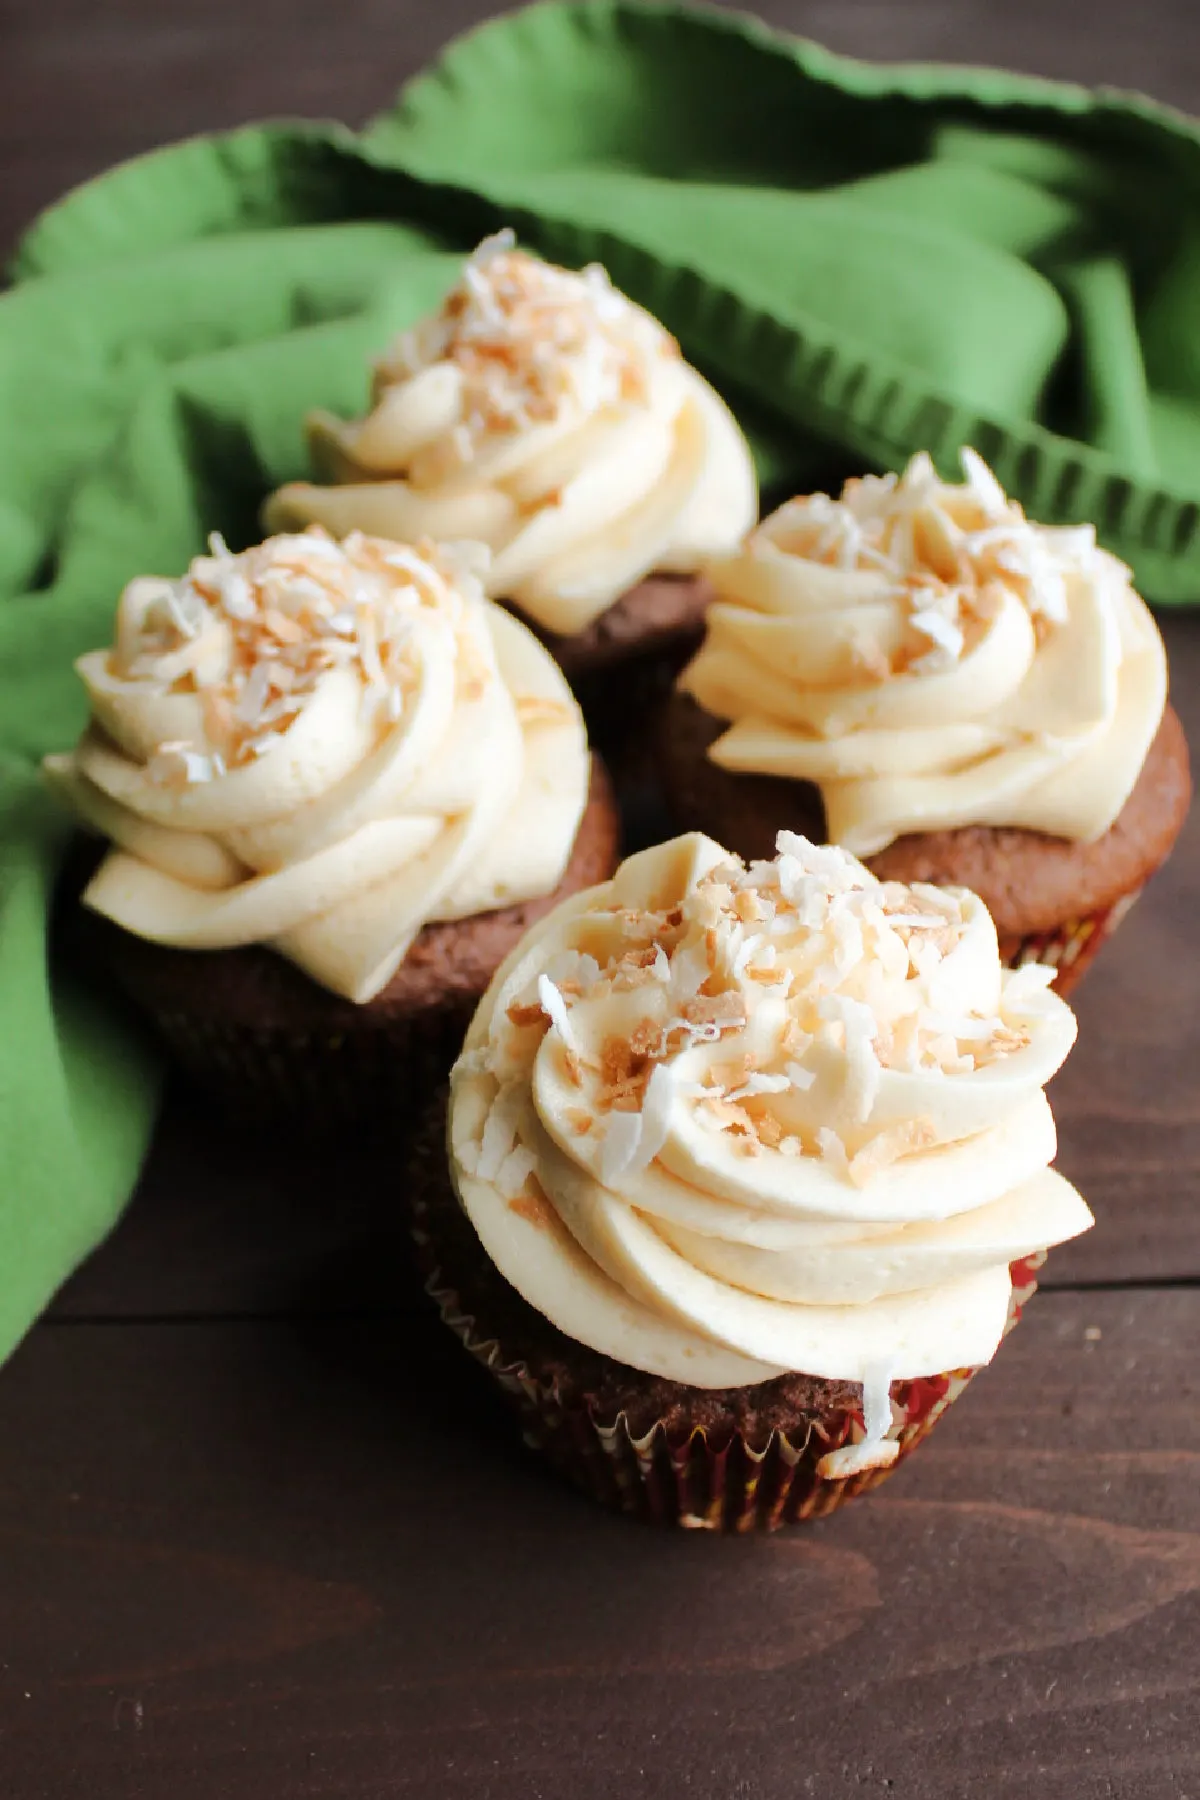 chocolate cupcakes with swirls of caramel buttercream and toasted coconut on top.